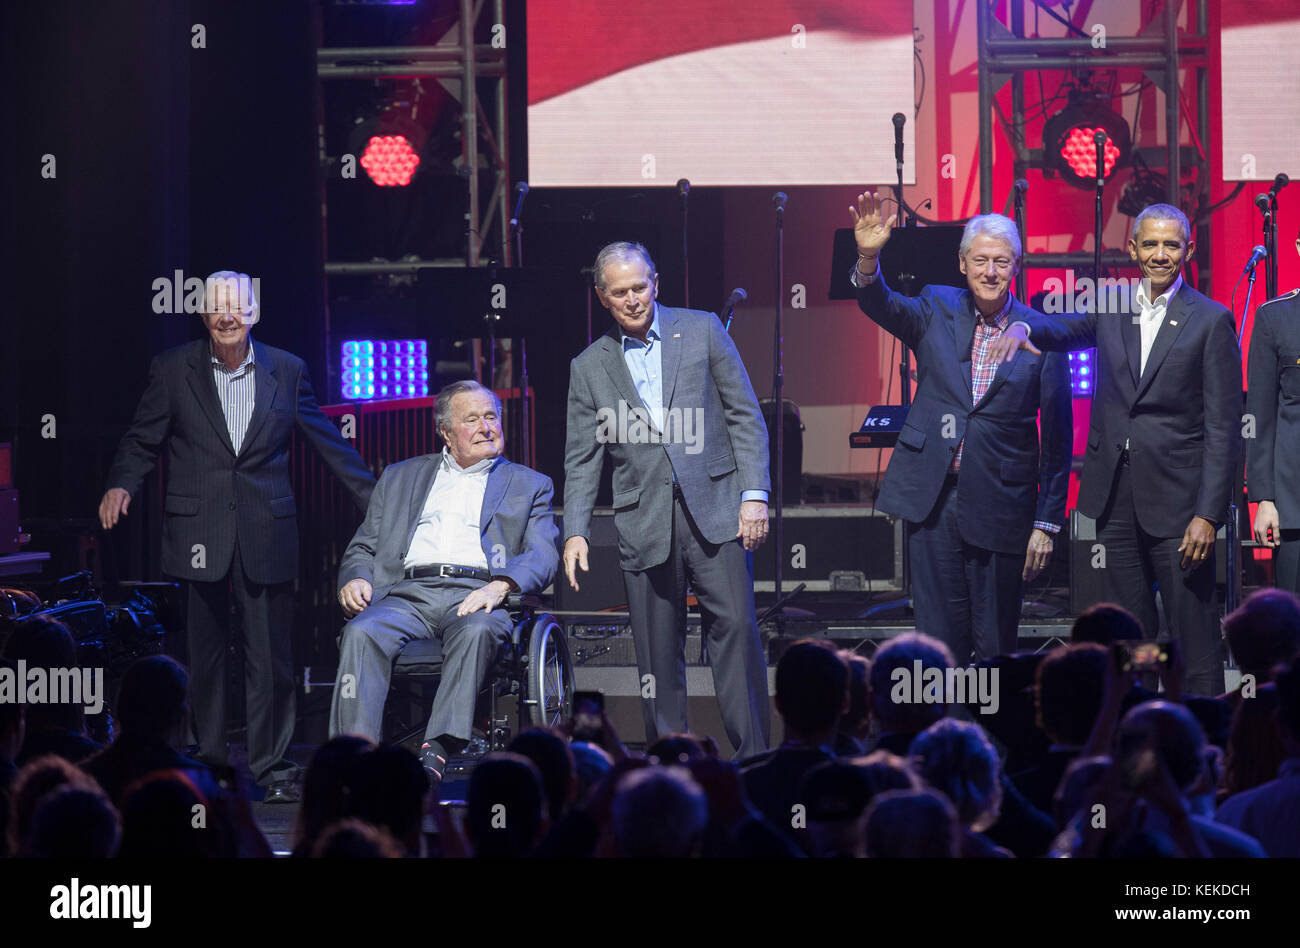 College Station, Texas USA Oct. 21, 2017: The five living former U.S. Presidents onstage at Texas A&M University's Reed Arena for a One America Appeal benefit concert and fund raiser for hurricane and storm relief. Left to right, former presidents Jimmy Carter, George H.W. Bush, George W. Bush, Bill Clinton and Barack Obama appear midway in the concert. Credit: Bob Daemmrich/Alamy Live News Stock Photo